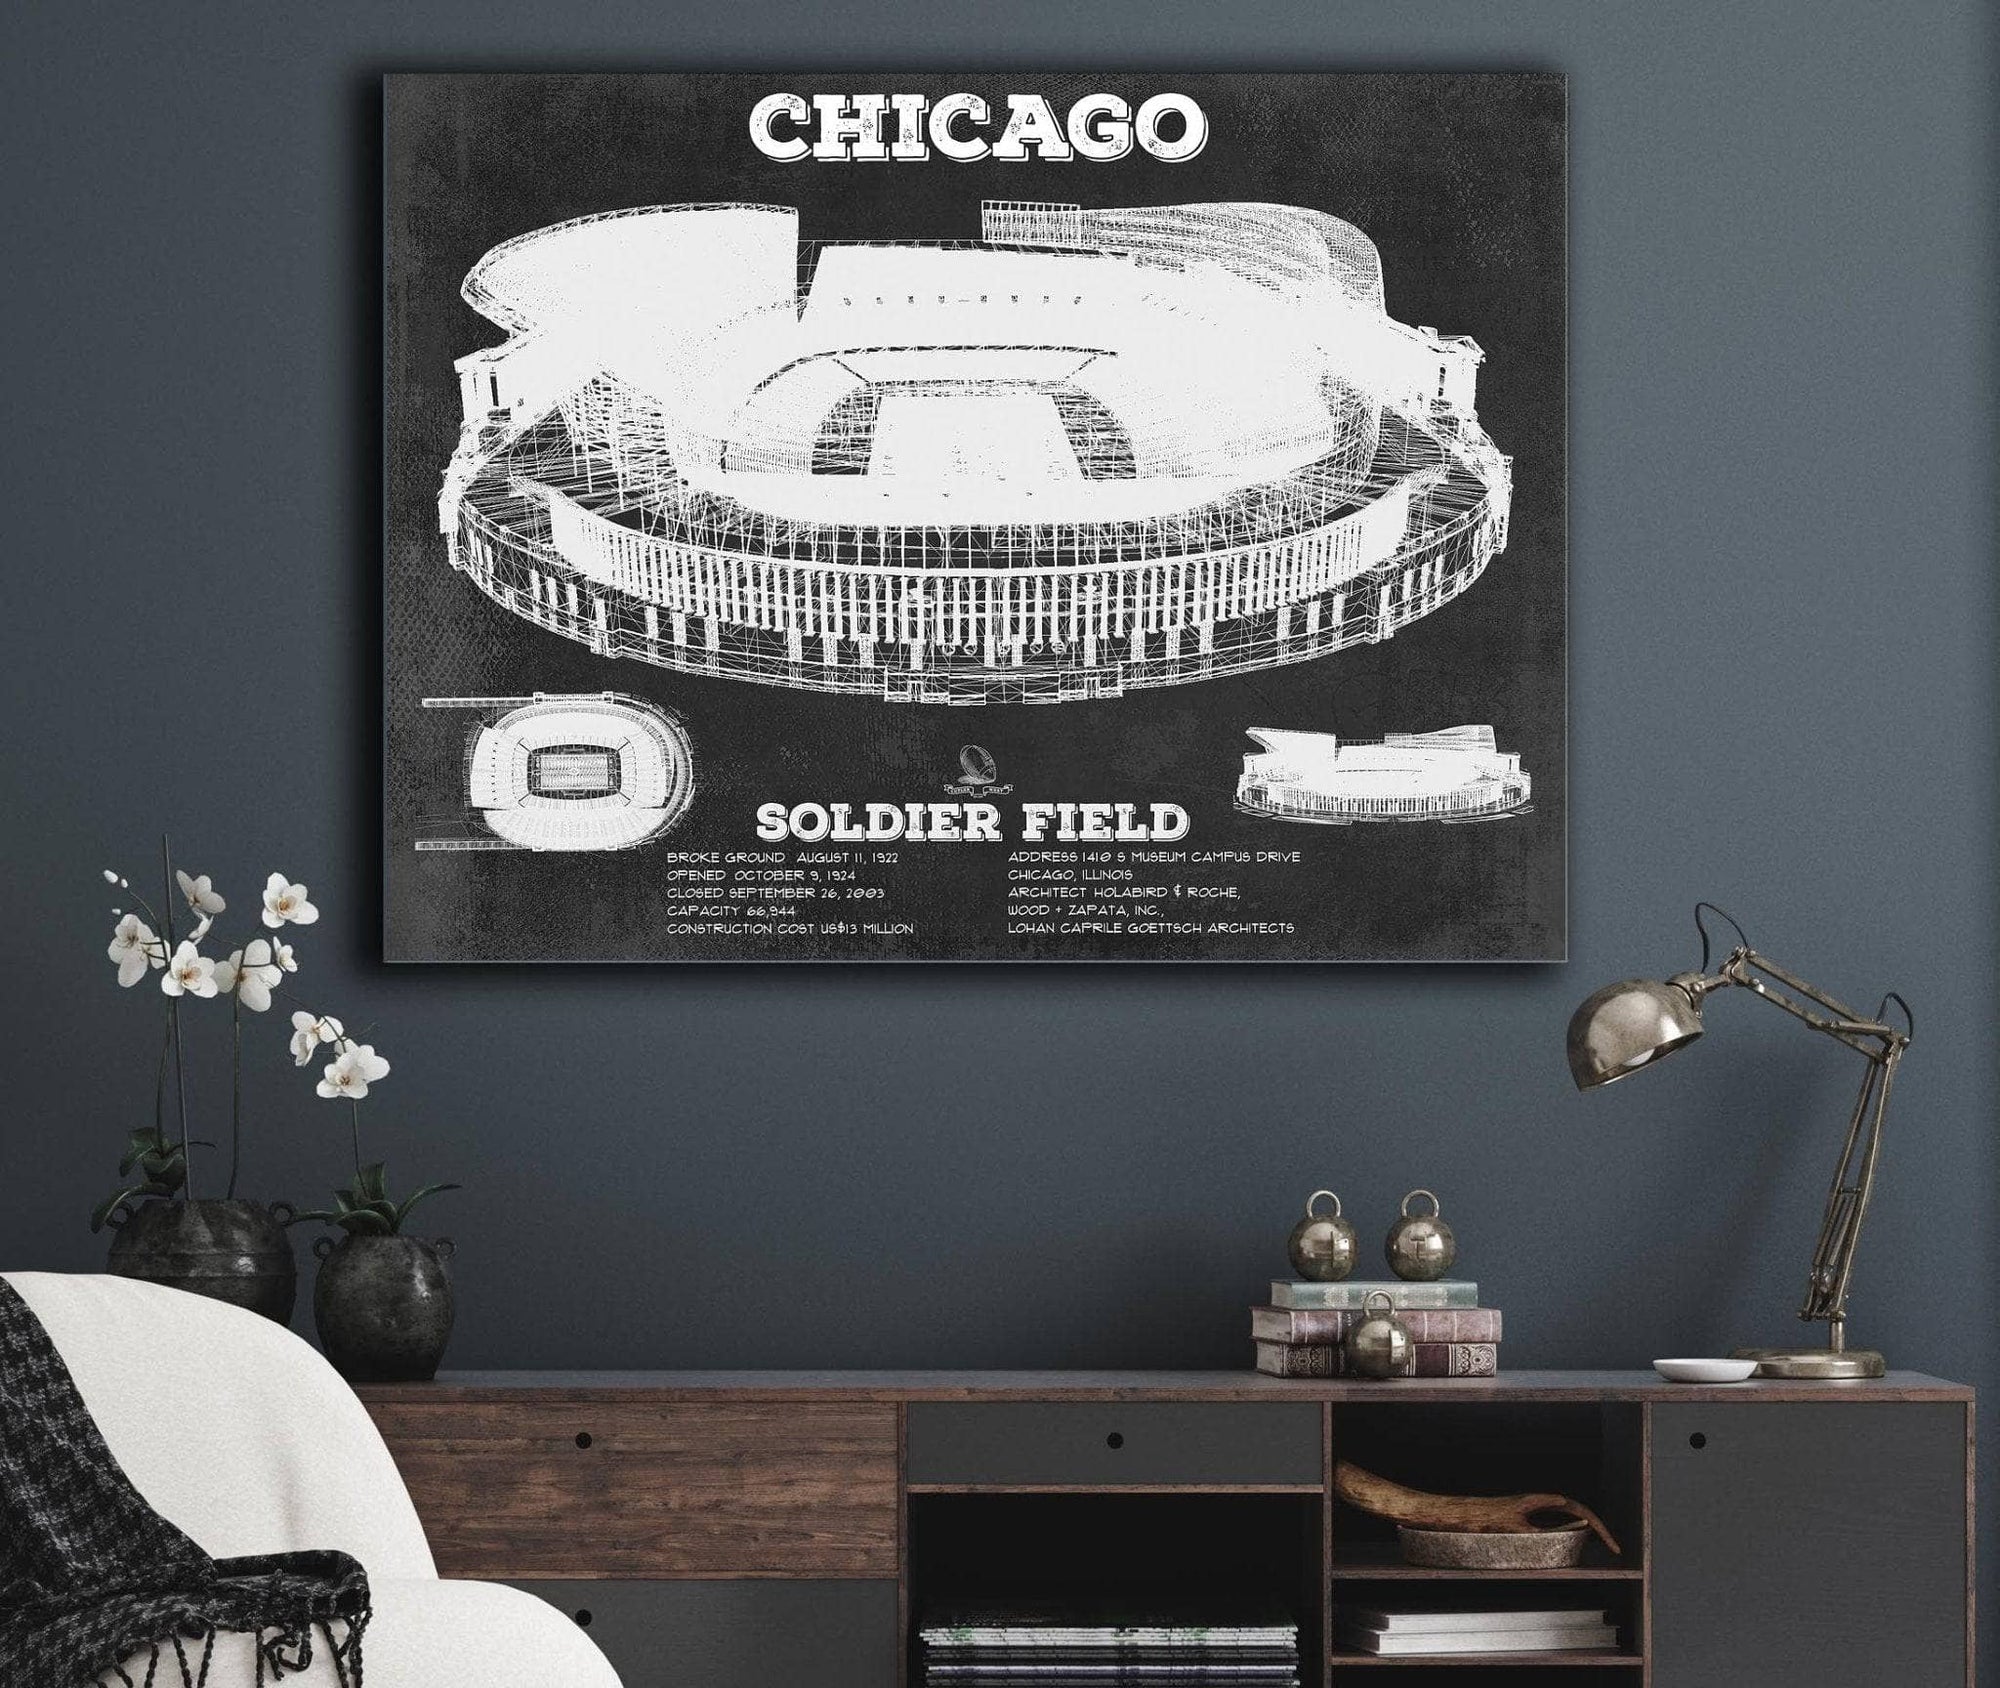 Cutler West Pro Football Collection Chicago Bears Stadium Seating Chart - Soldier Field - Vintage Football Print